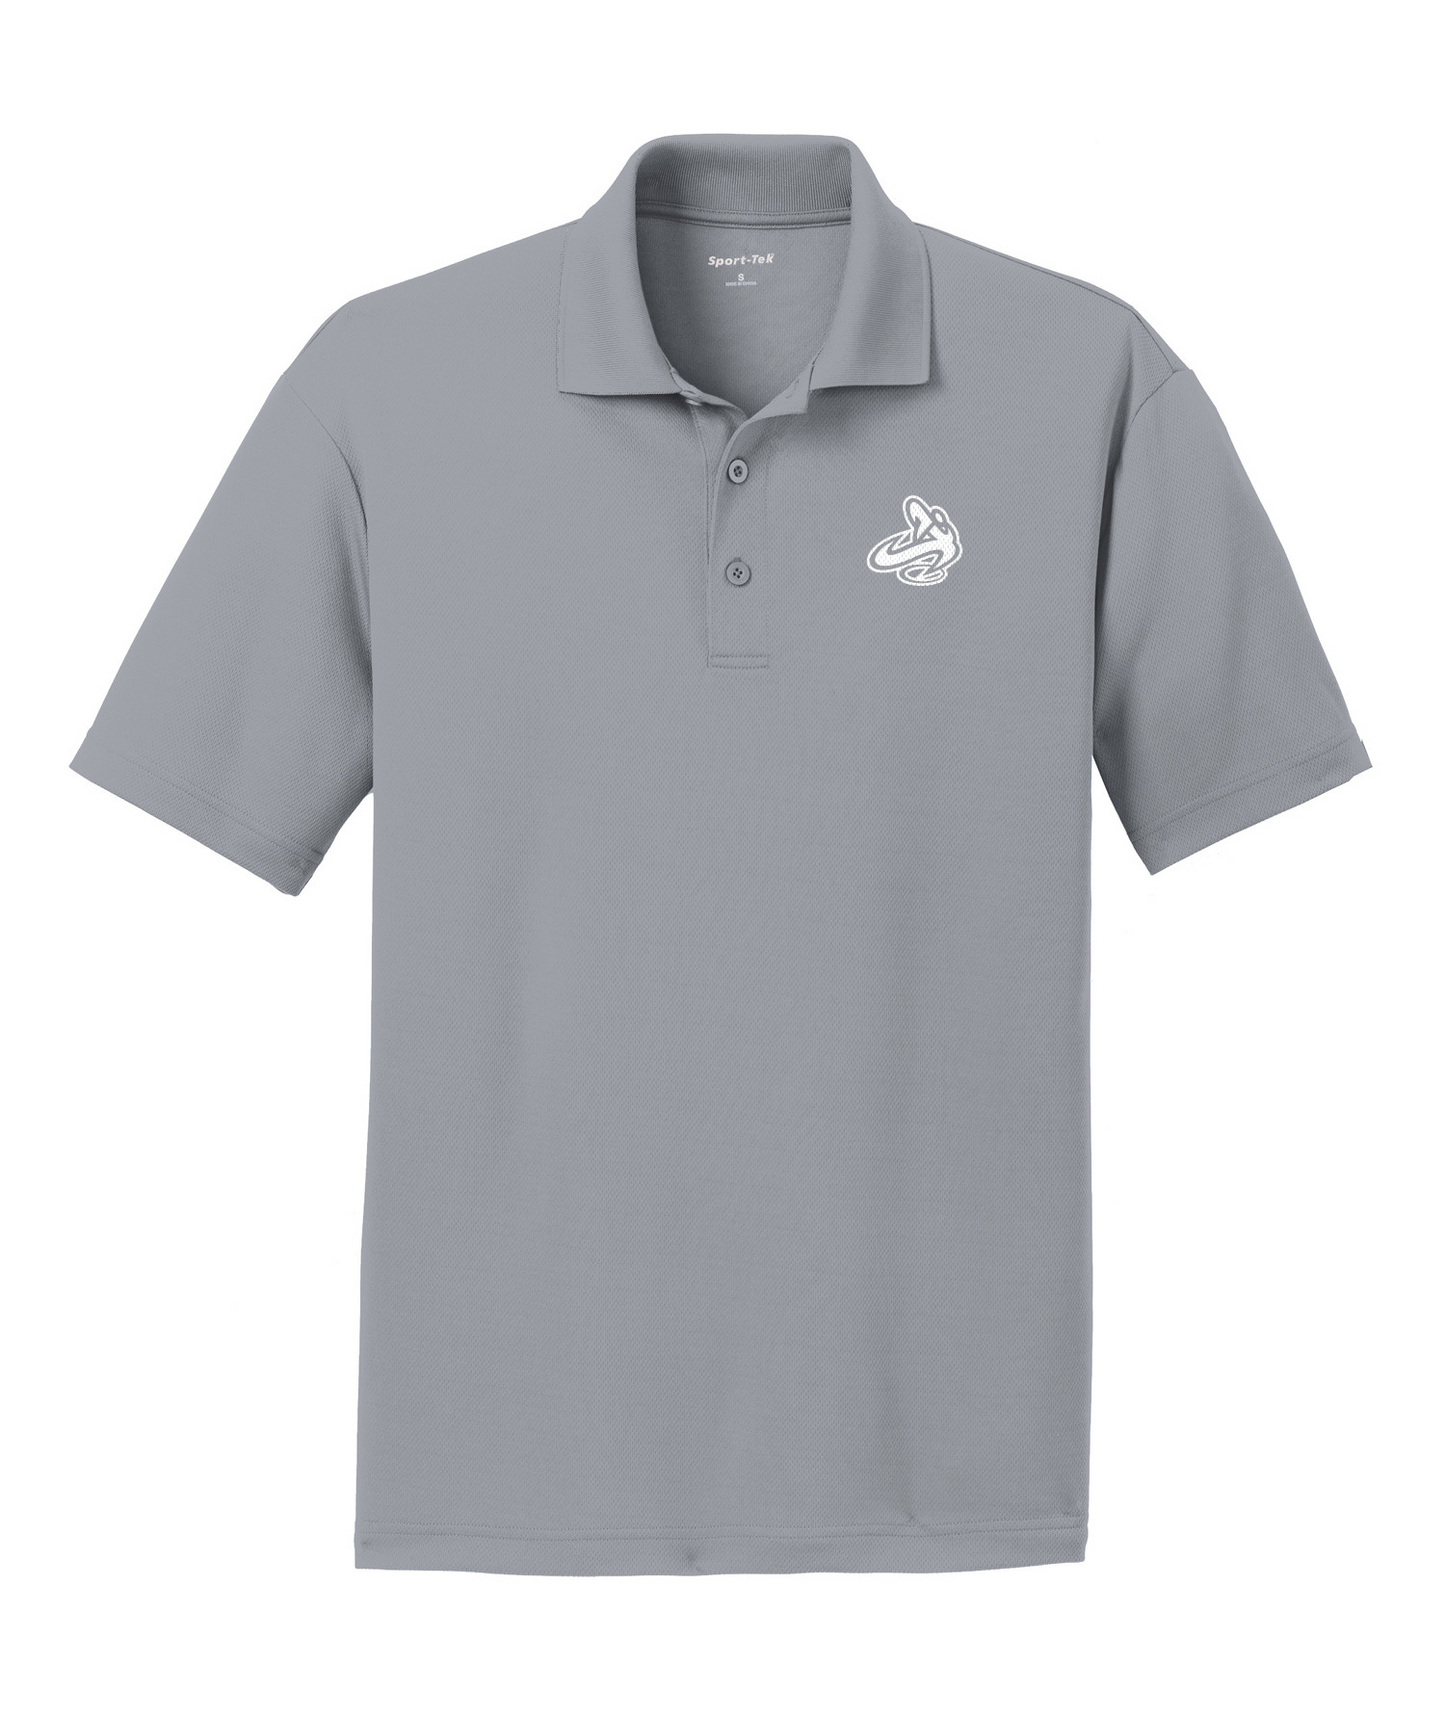 Athletic Apparatus Men's Embroidered Ultrafine Mesh Polo or Similar - Athletic Apparatus